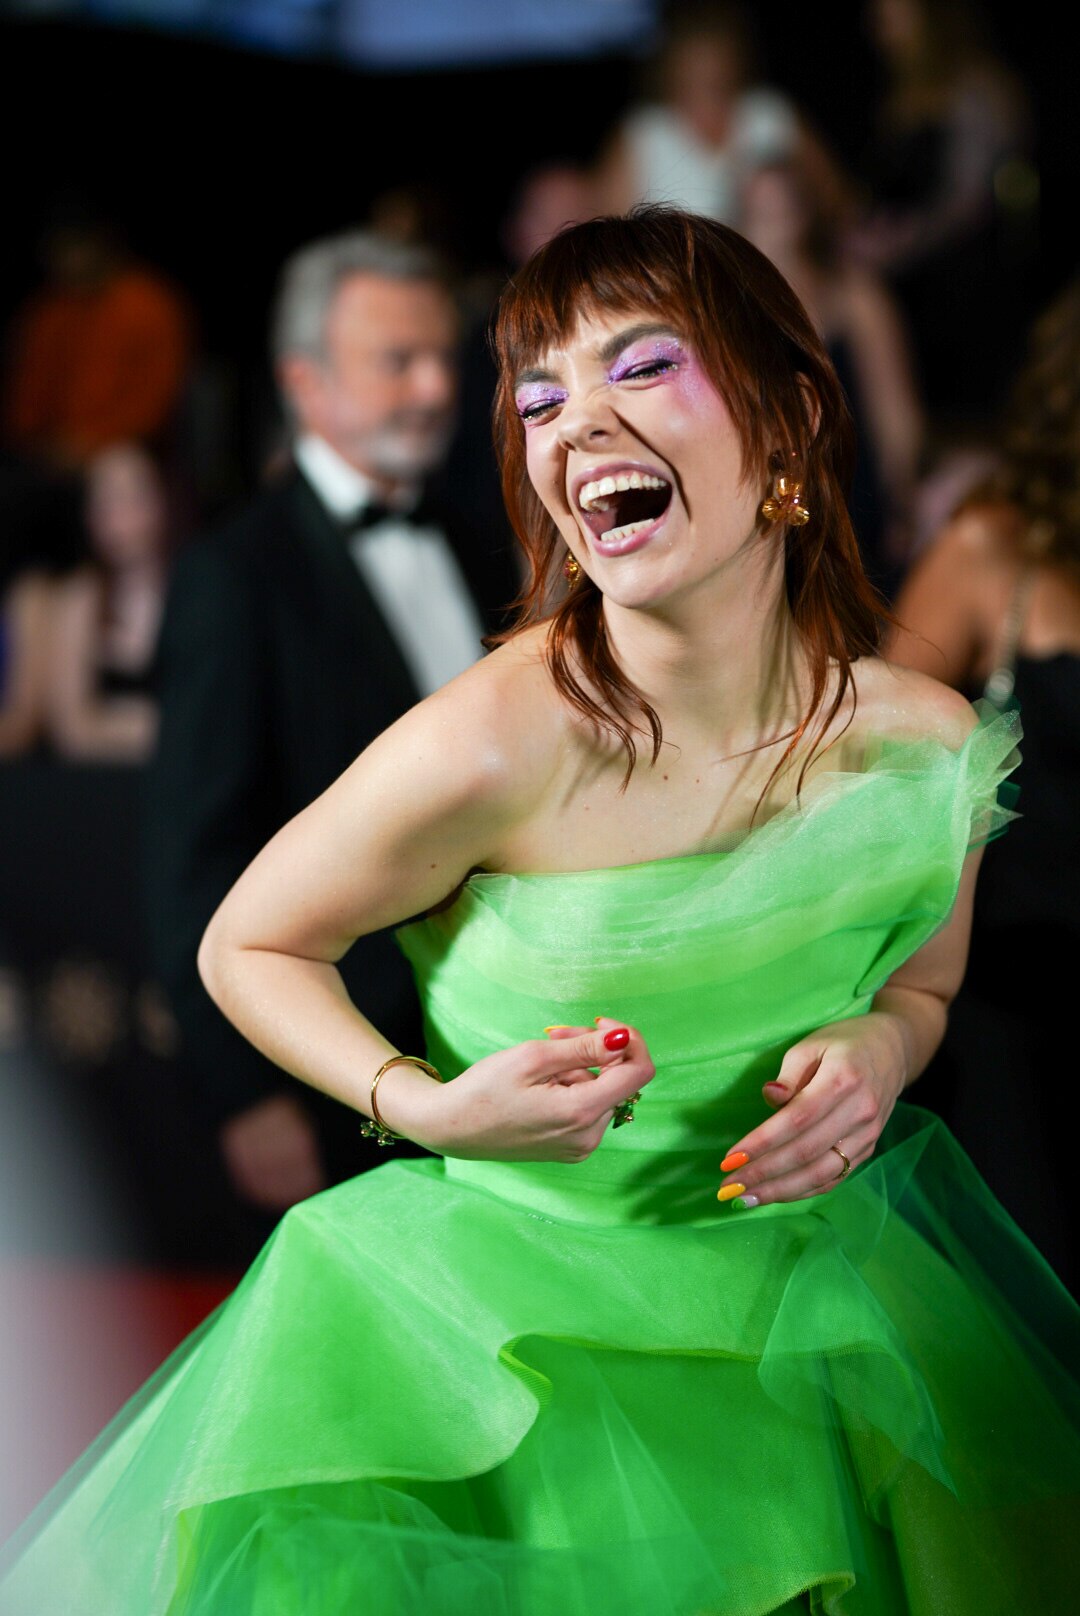 A woman in a neon green dress smiles on the red carpet